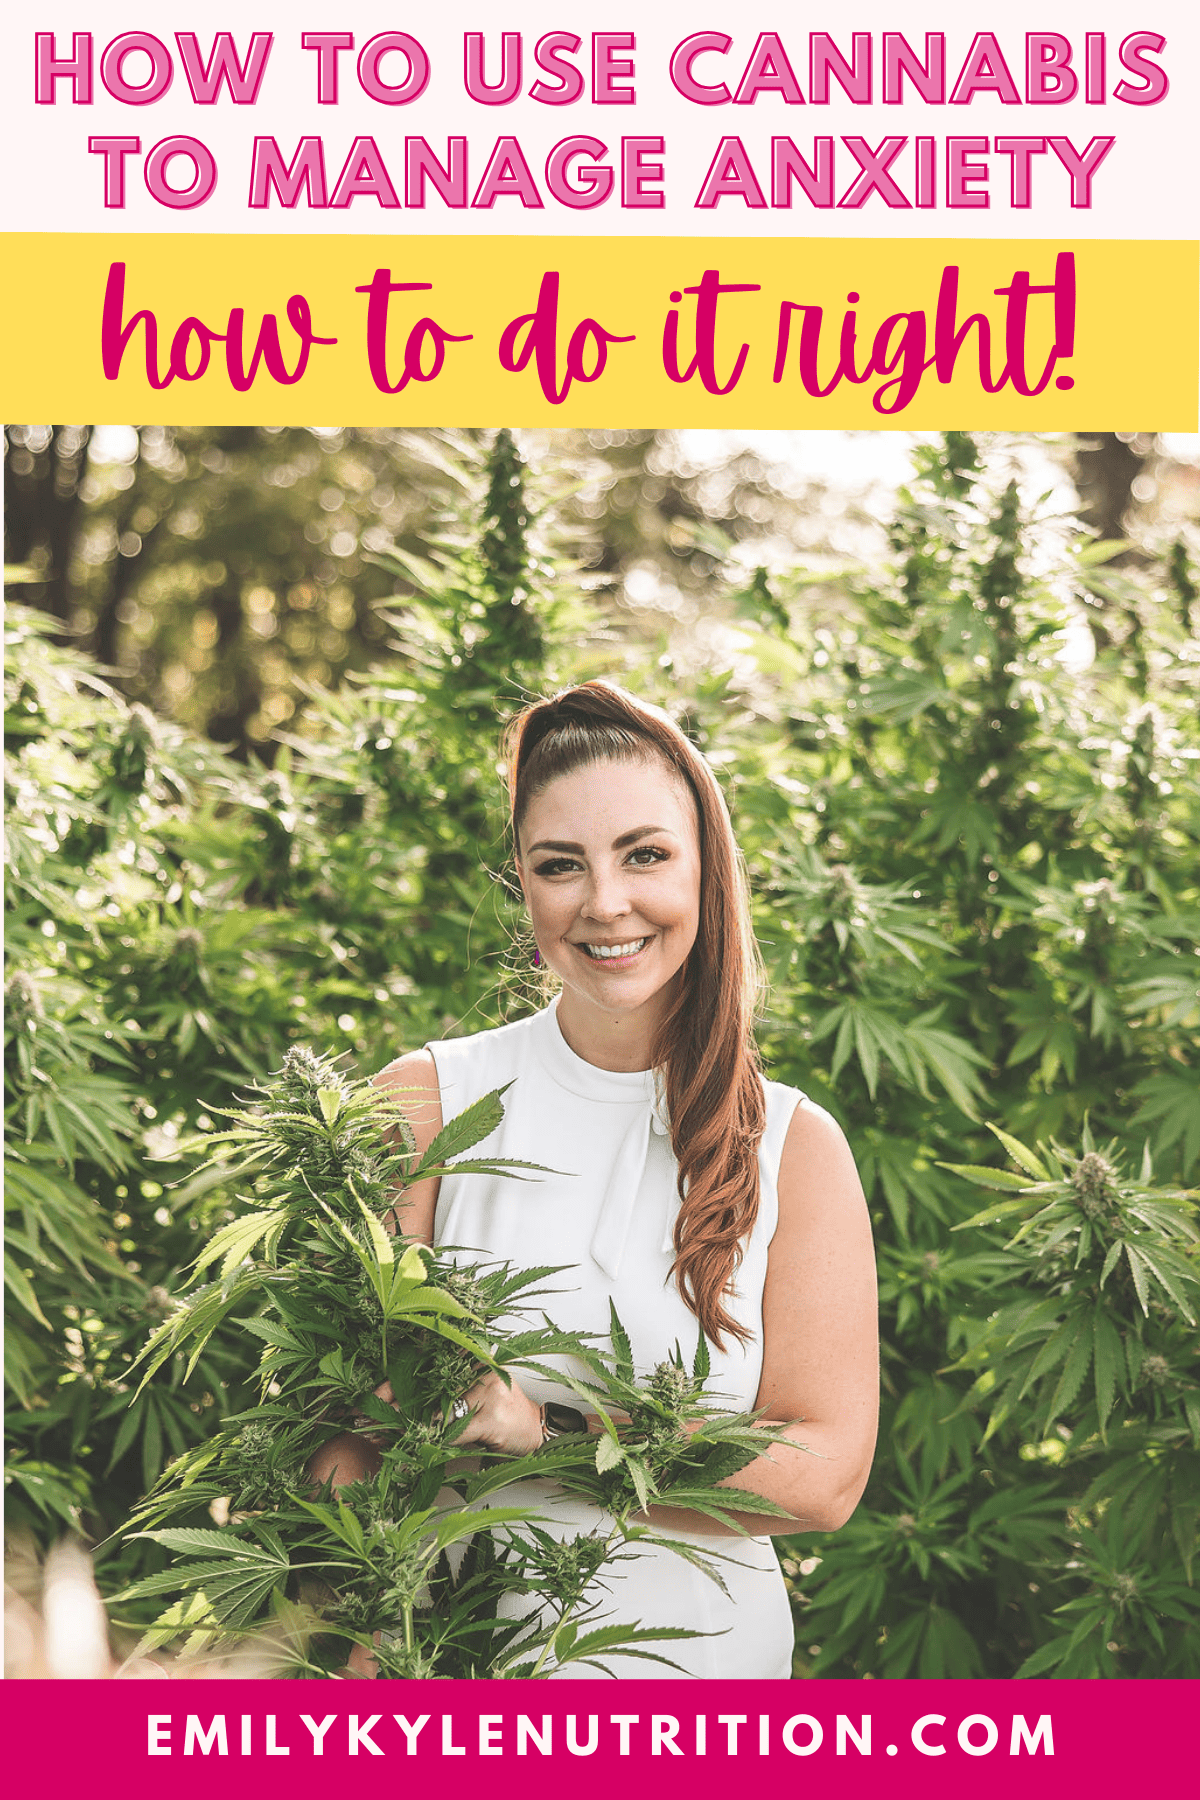 A picture of Emily Kyle in a cannabis garden with text that says how to use cannabis to manage anxiety.